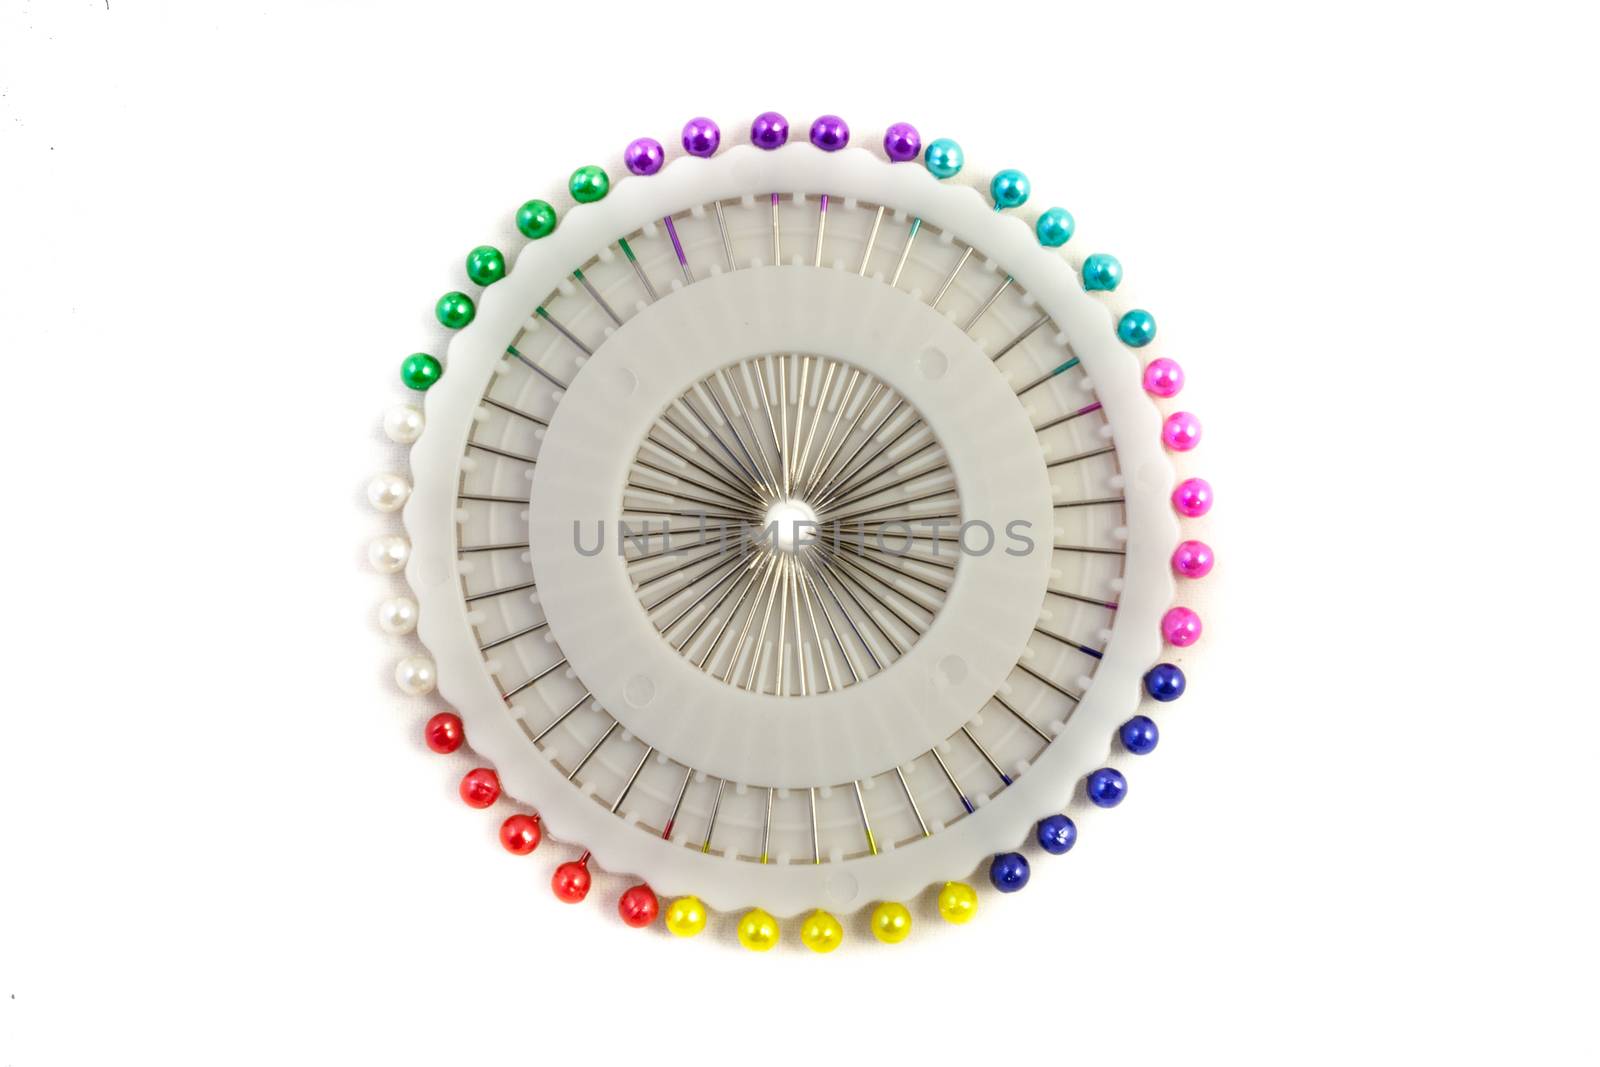 Sewing pin needles in their case on an isolated white background